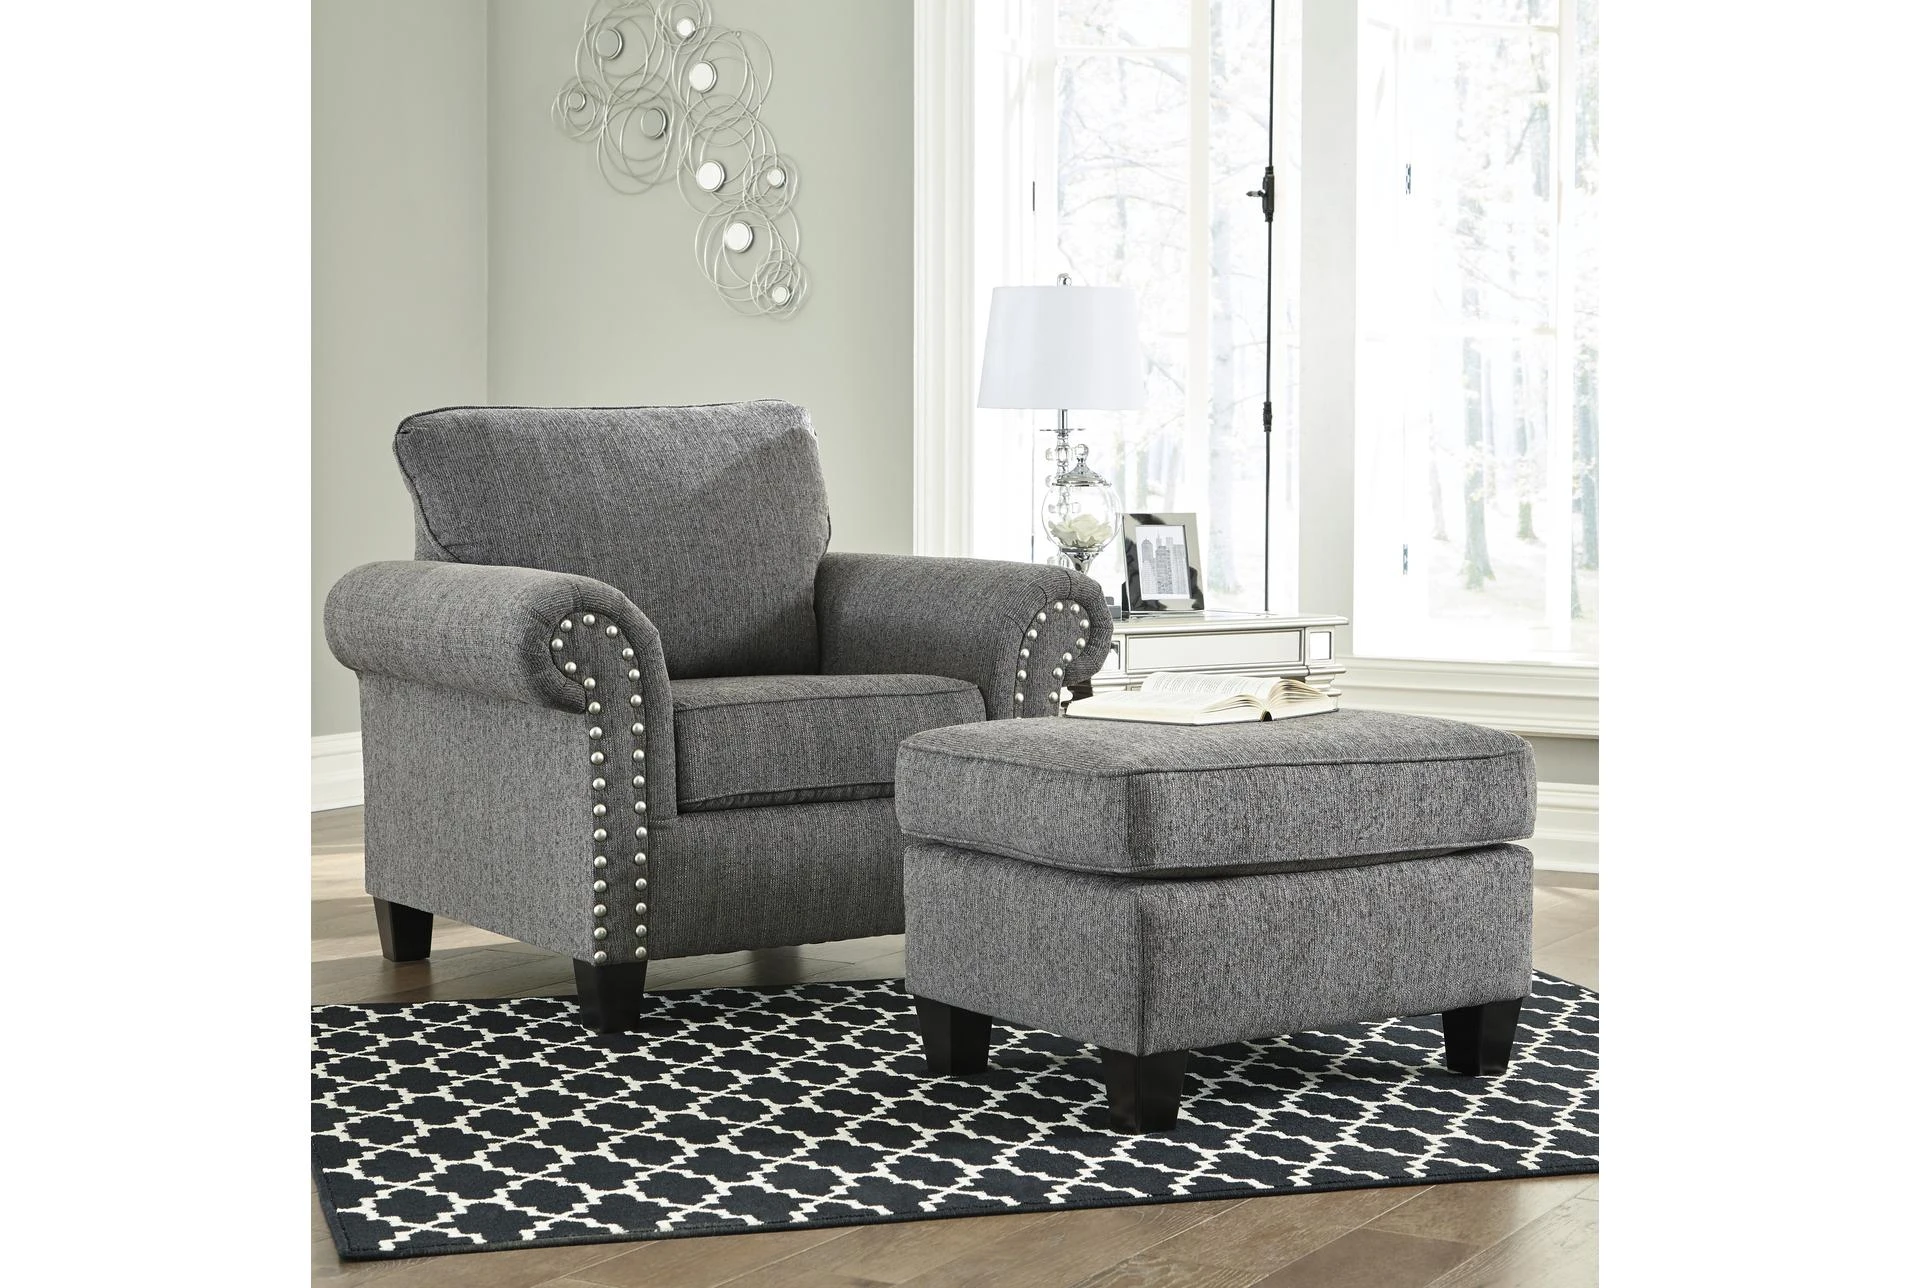 333009 Grey Fabric Chair And Ottoman Set Signature 01 ?w=1911&h=1288&mode=pad